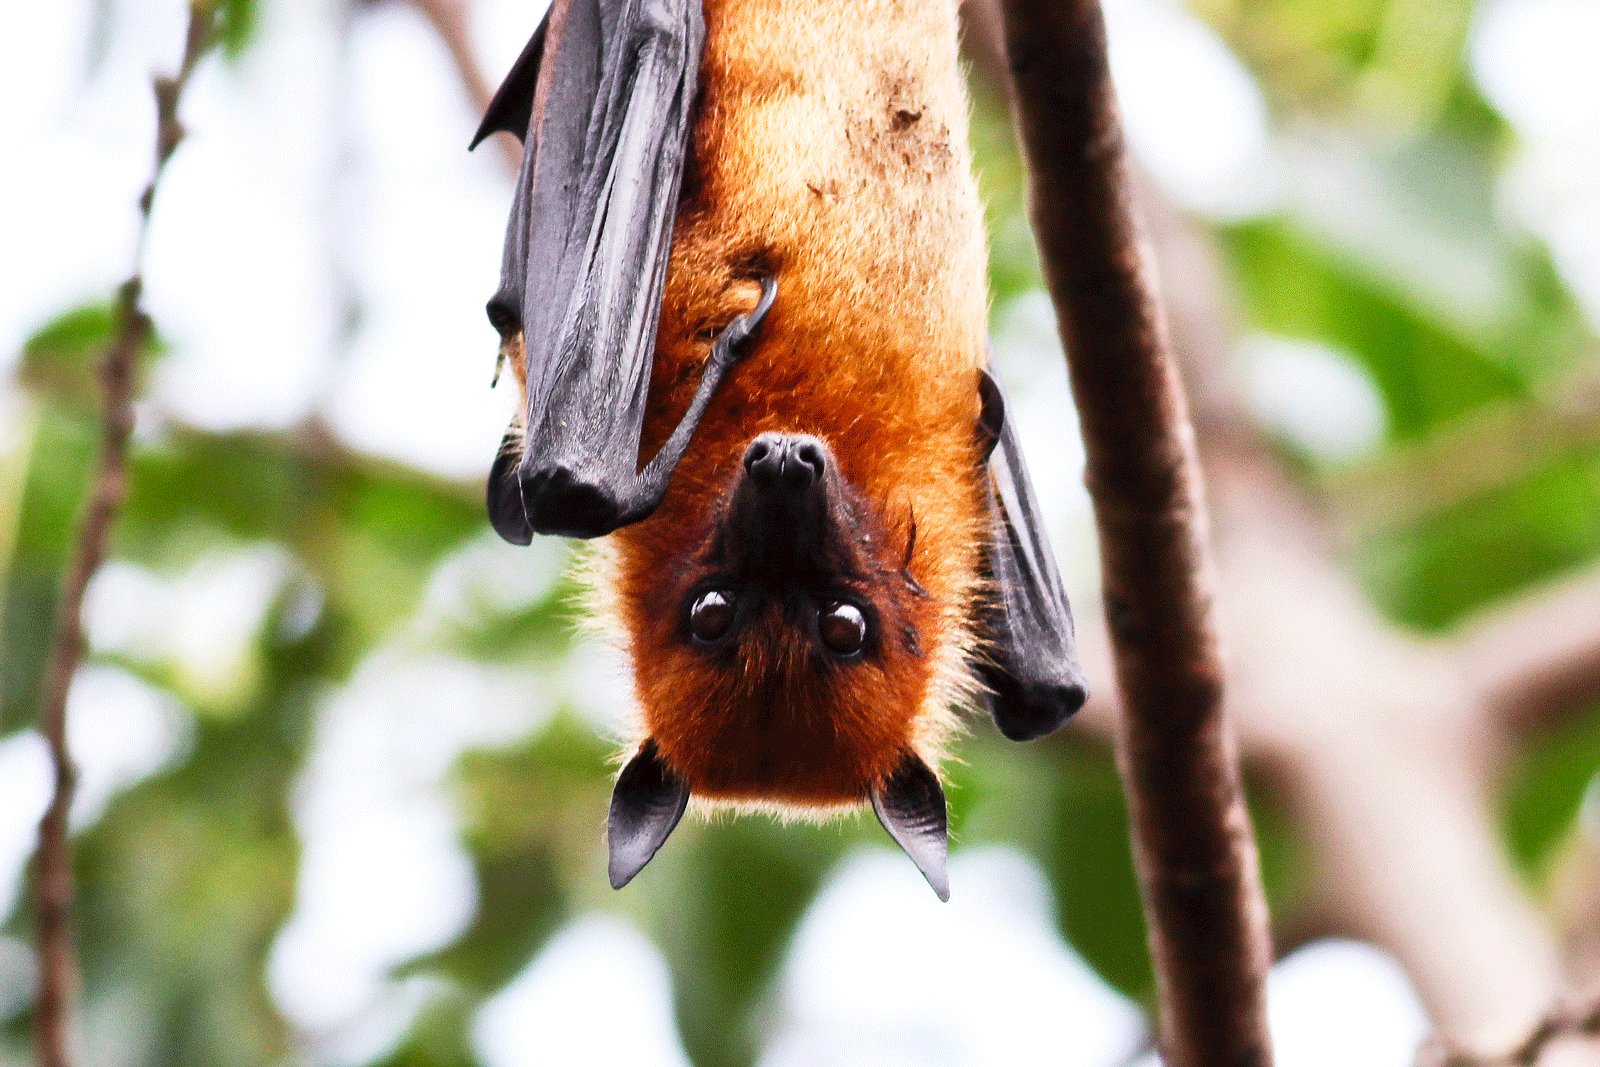 How to feed flying foxes in Kandy